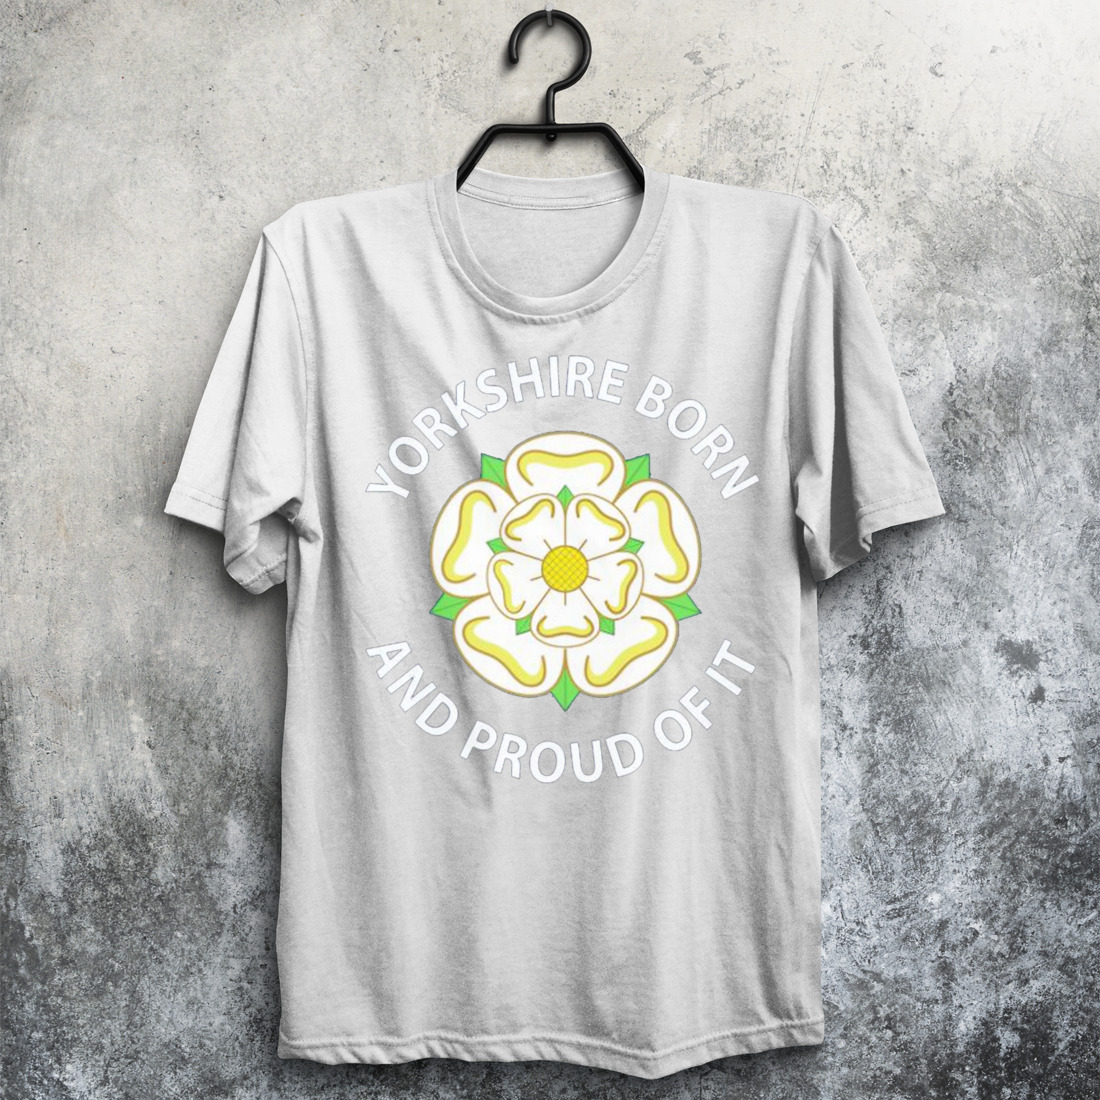 yorkshire born and proud of it shirt